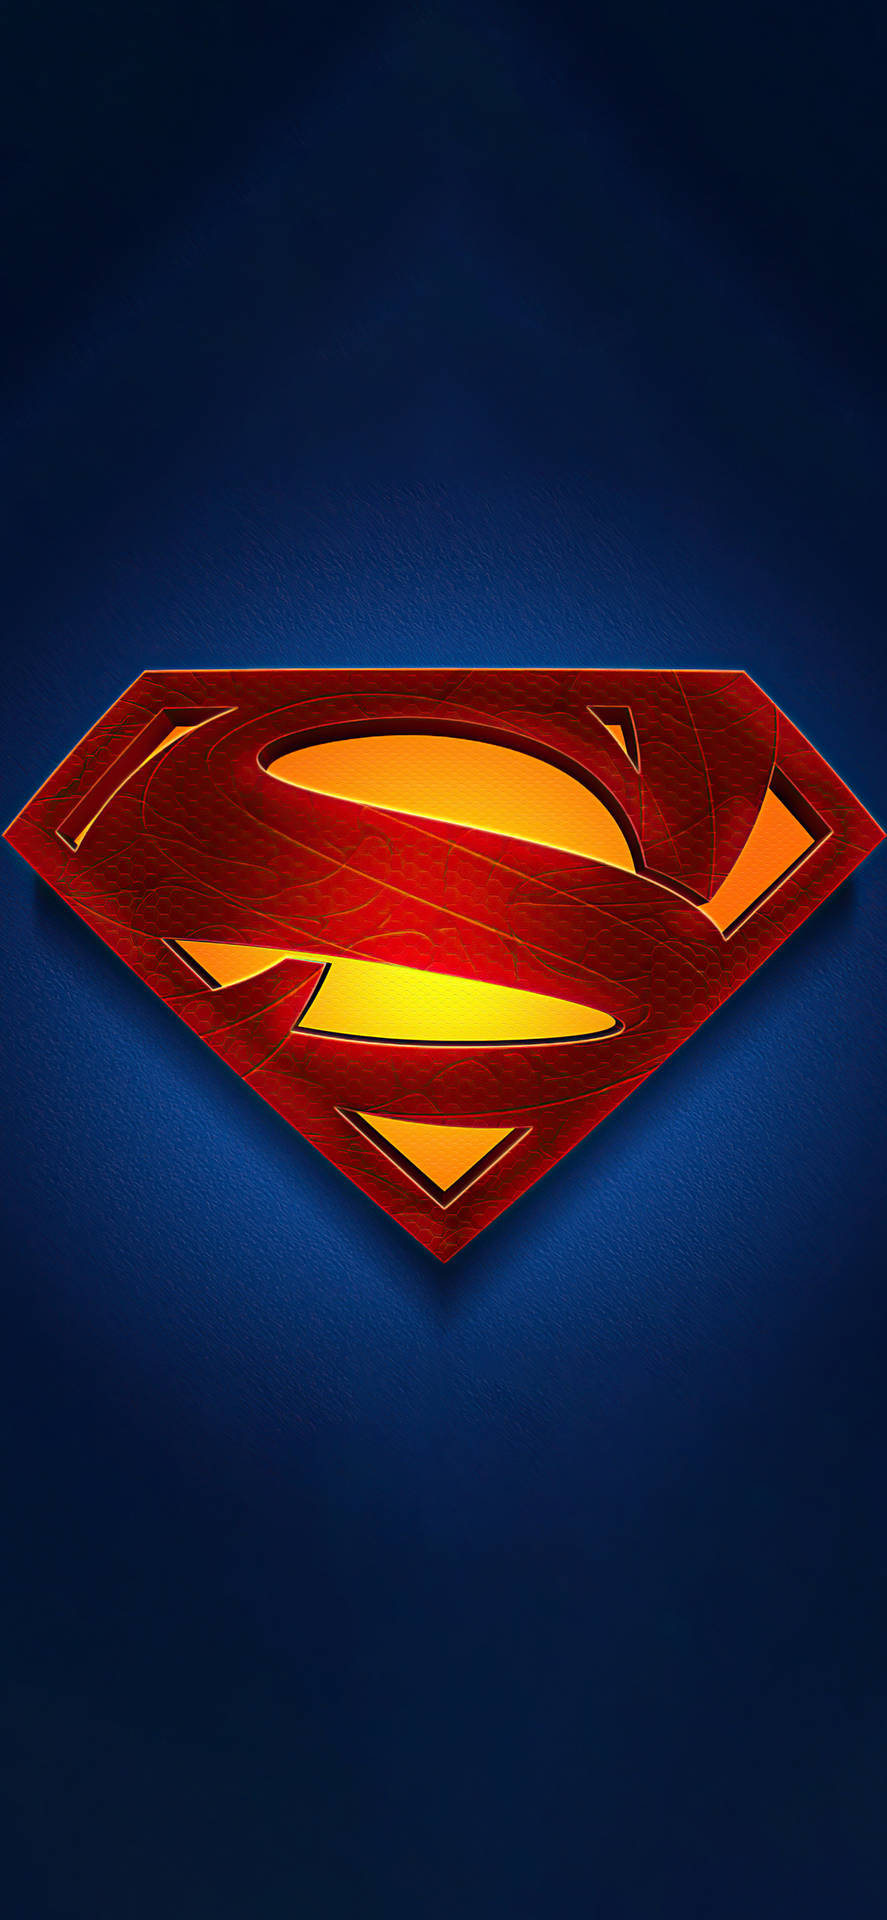 Cool Redesigned Superman Symbol Iphone Background